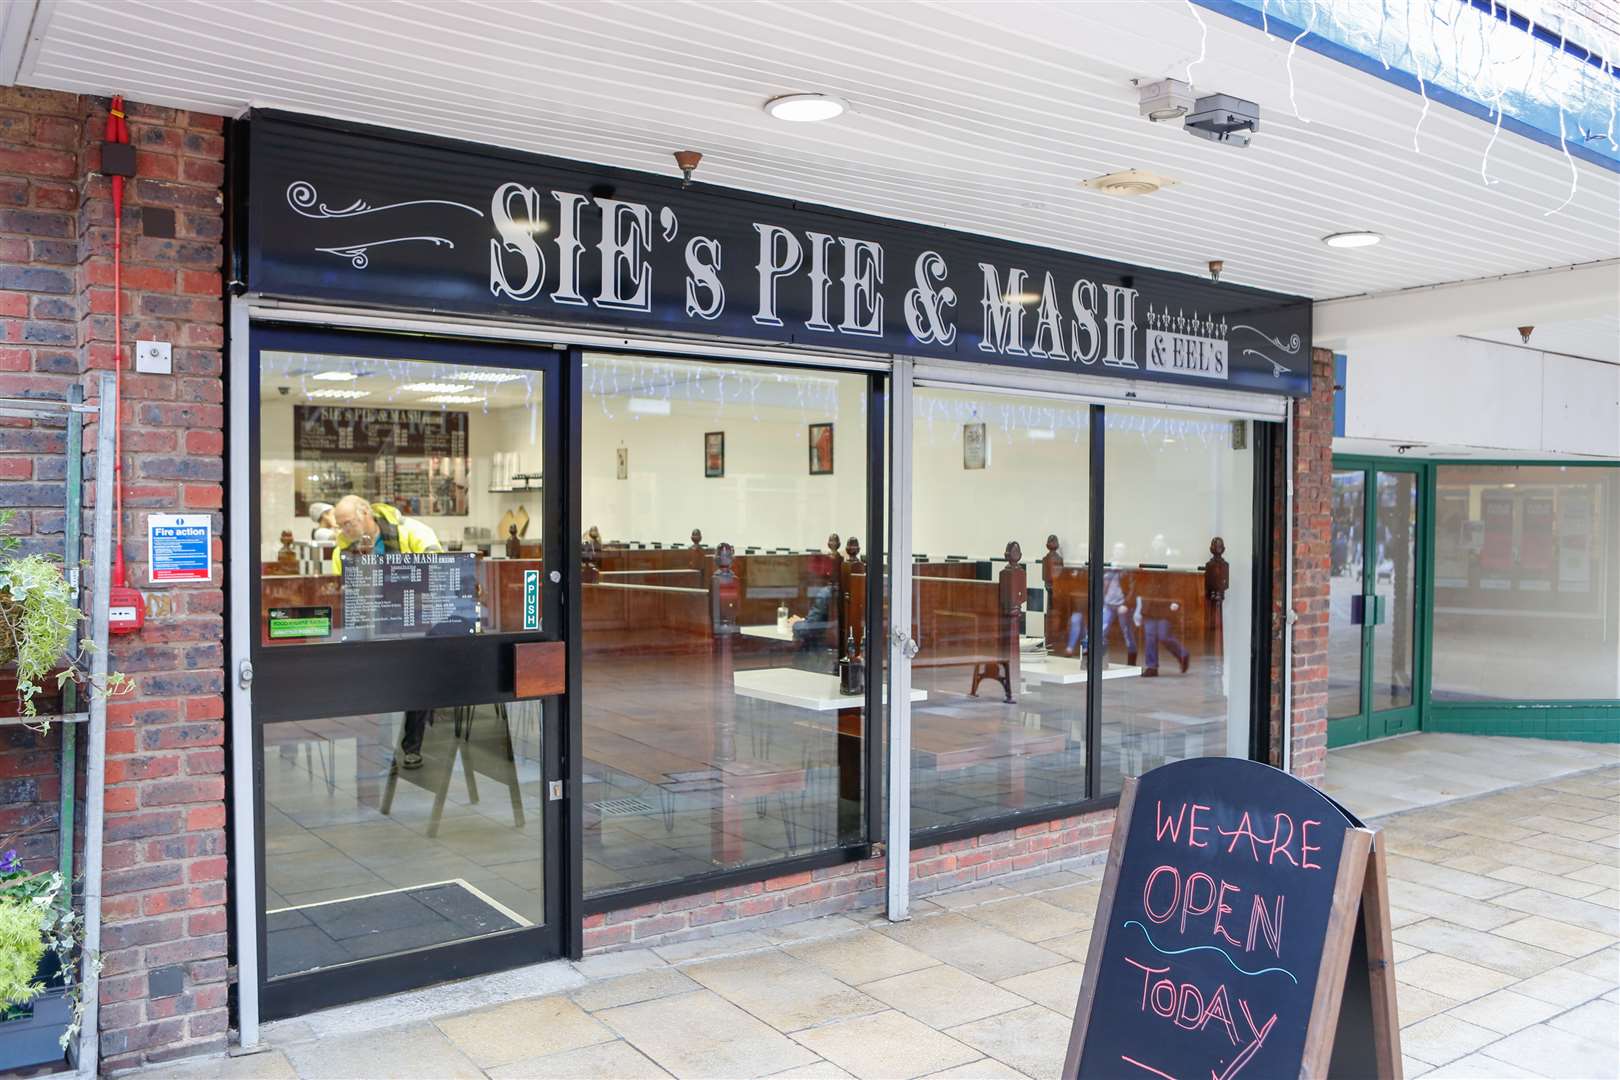 Sie's Pie and Mash shop opens at the St George's Centre, Gravesend